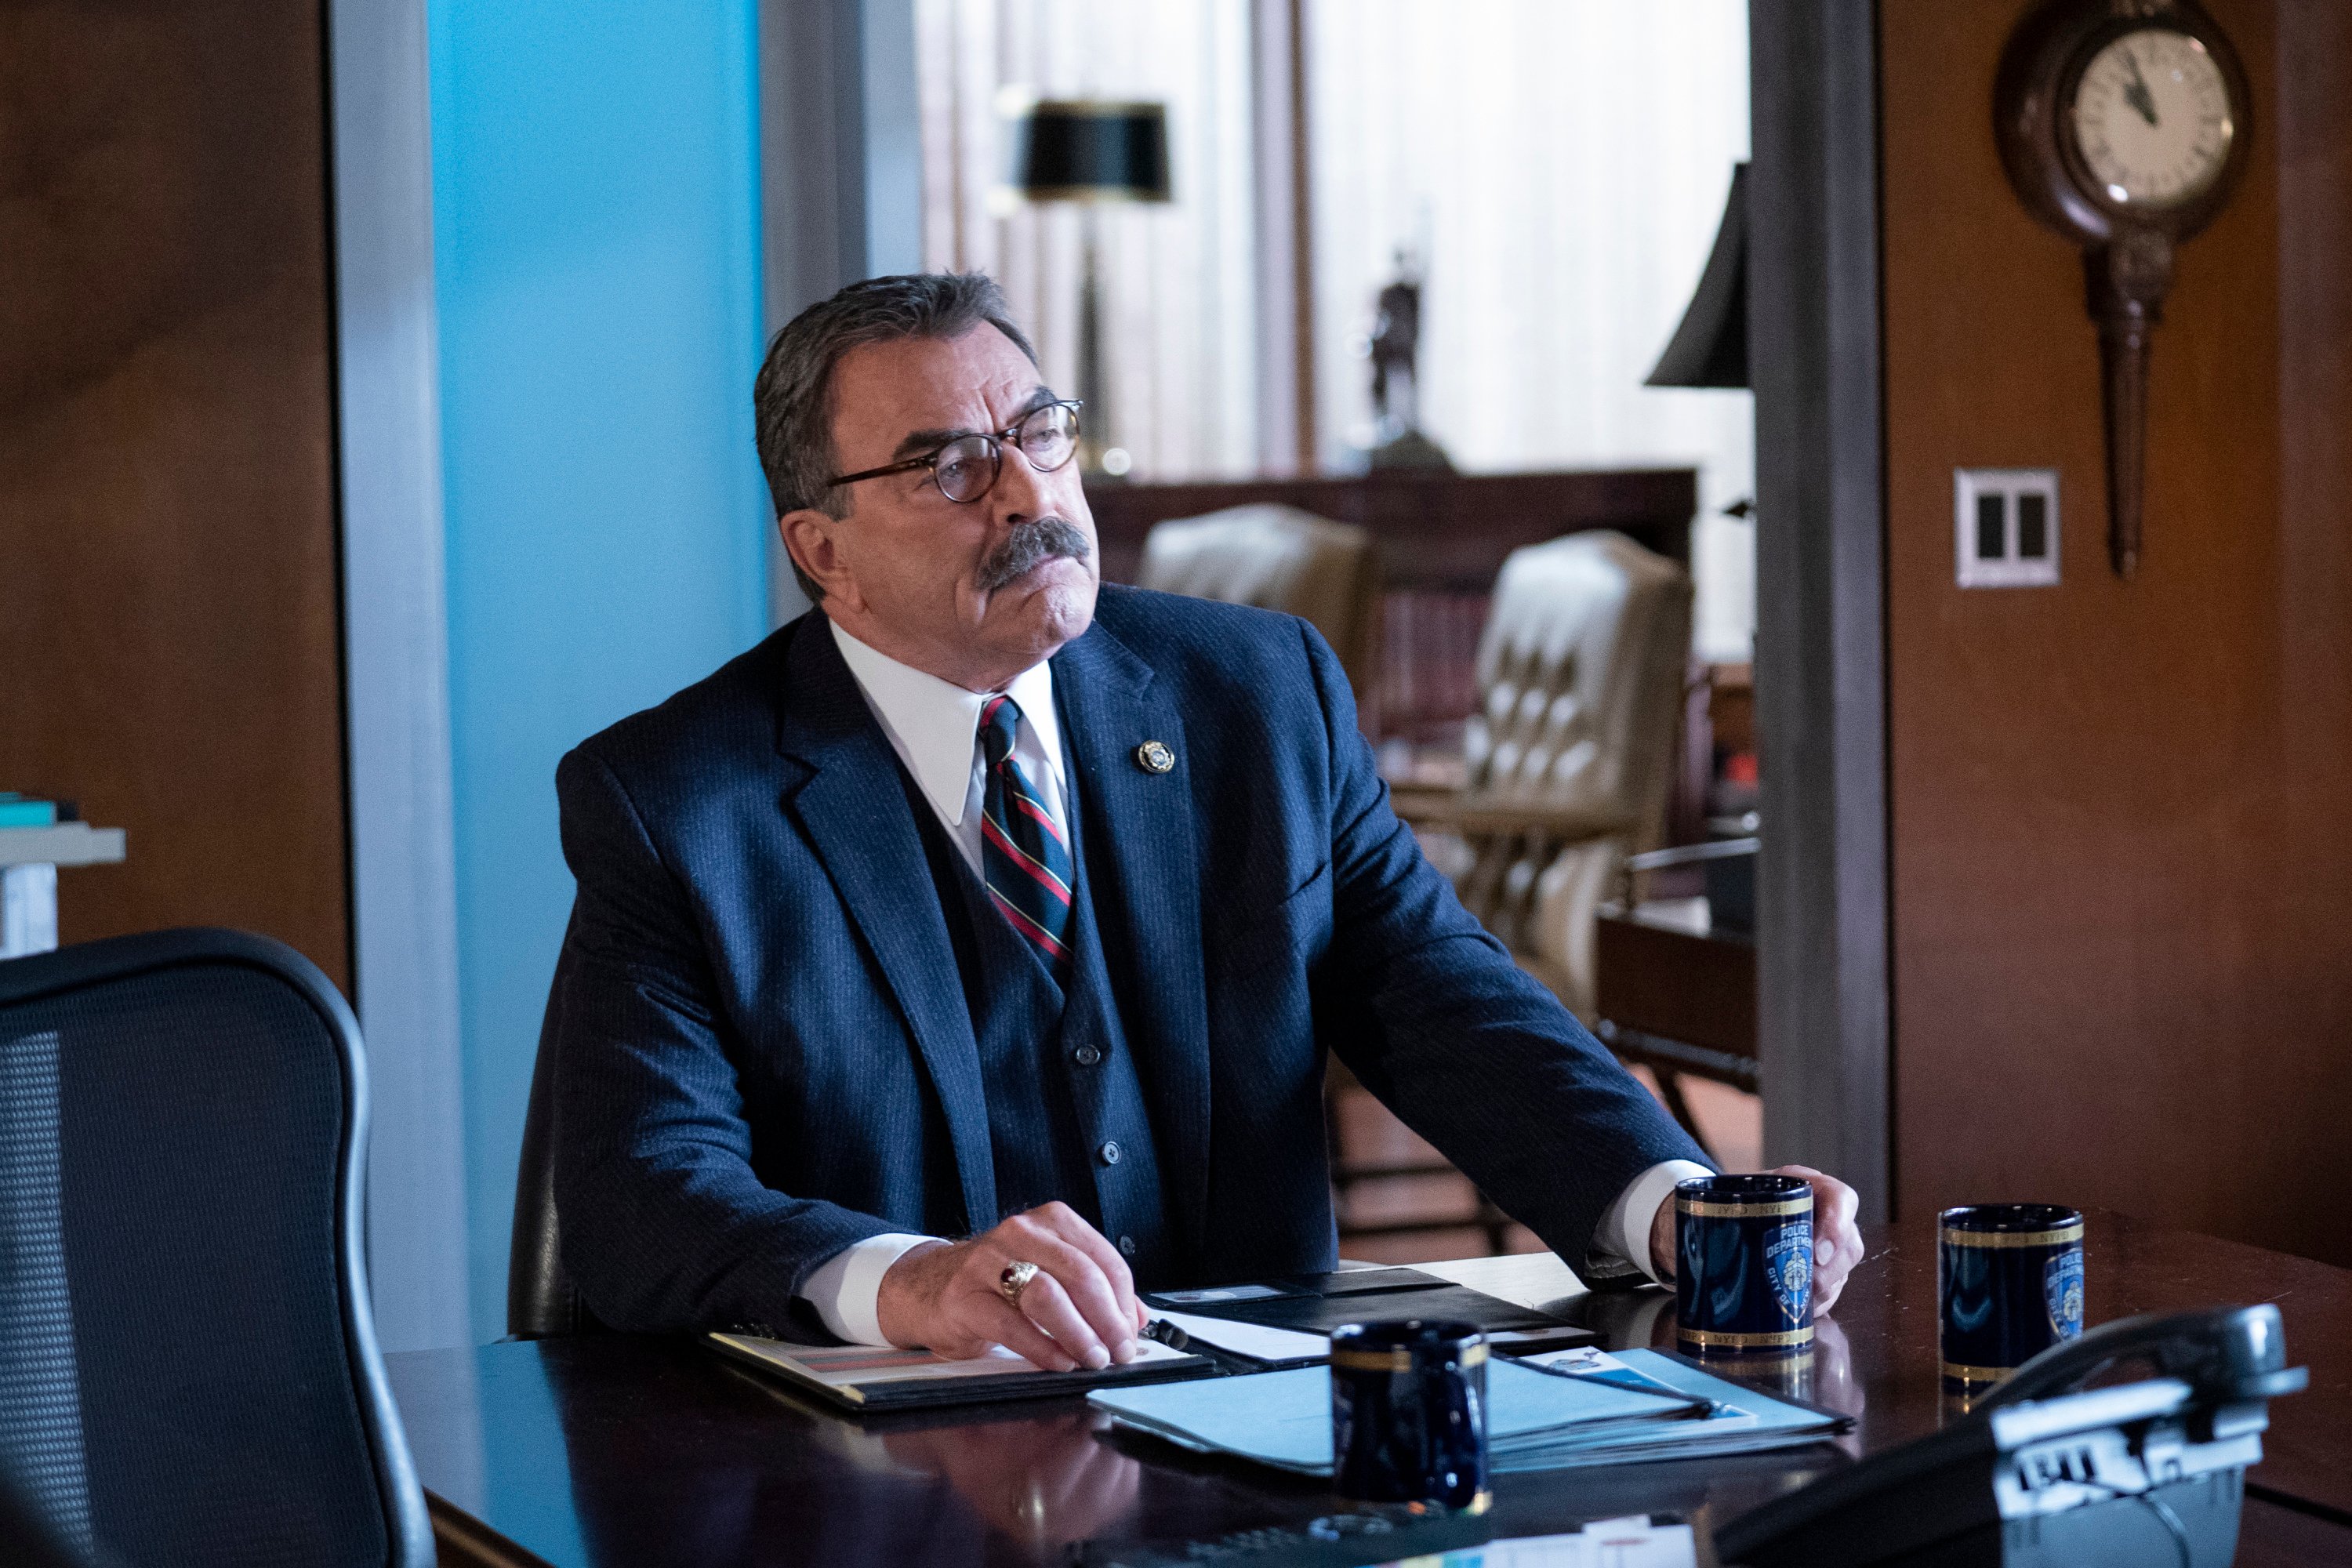 Tom Selleck as Frank Reagan on Blue Bloods | Patrick Harbron/CBS via Getty Images